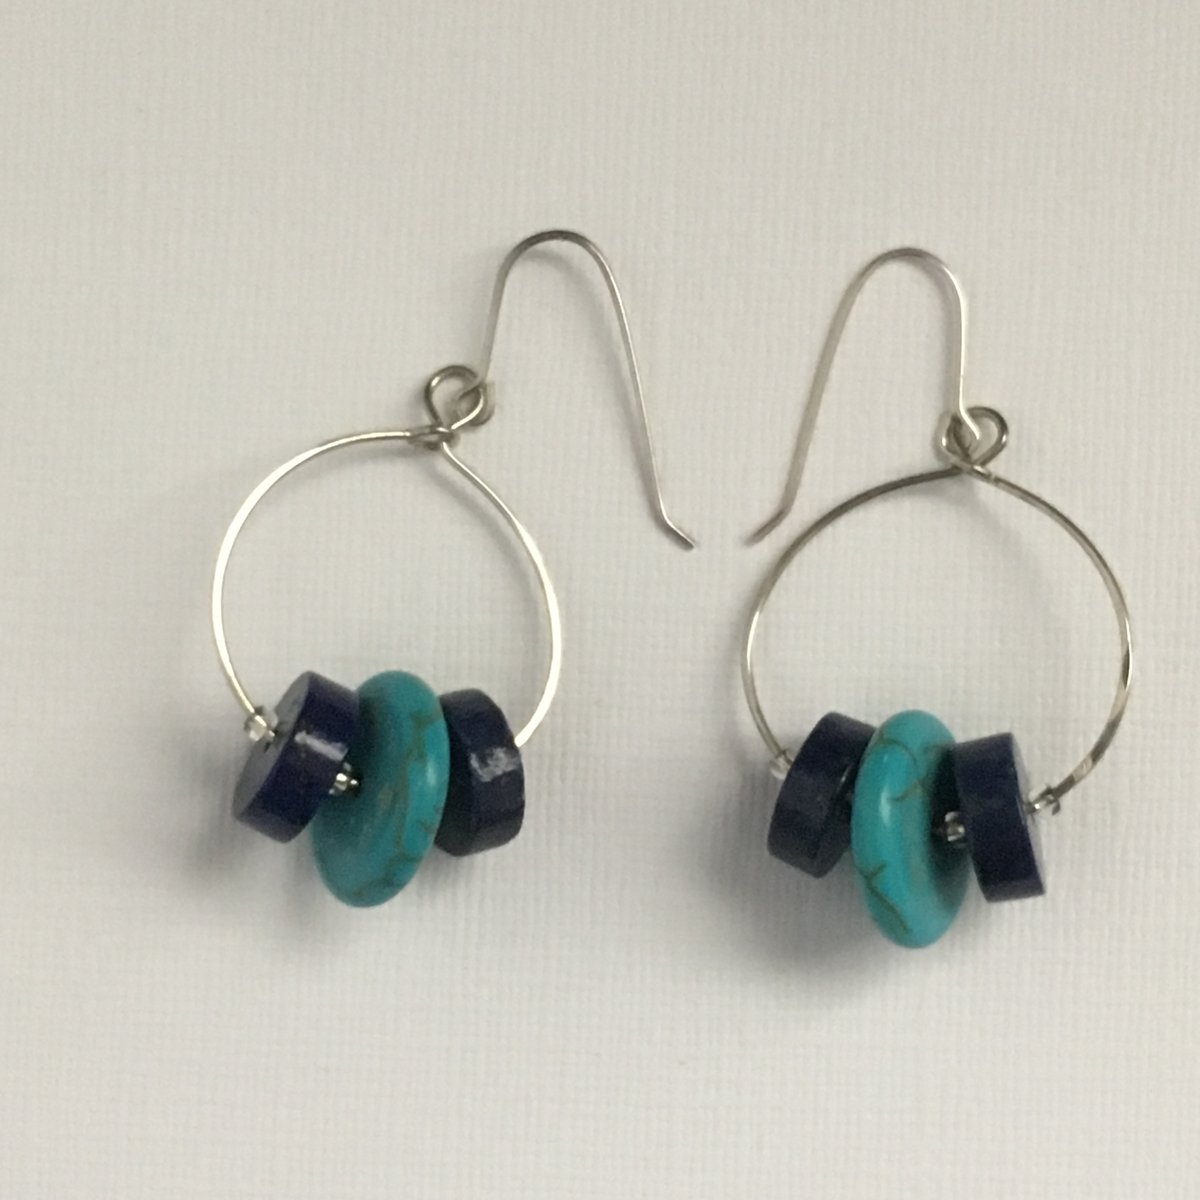 Image of "Peaceful Strength" -  Lapis lazuli and turquoise silver loop earrings